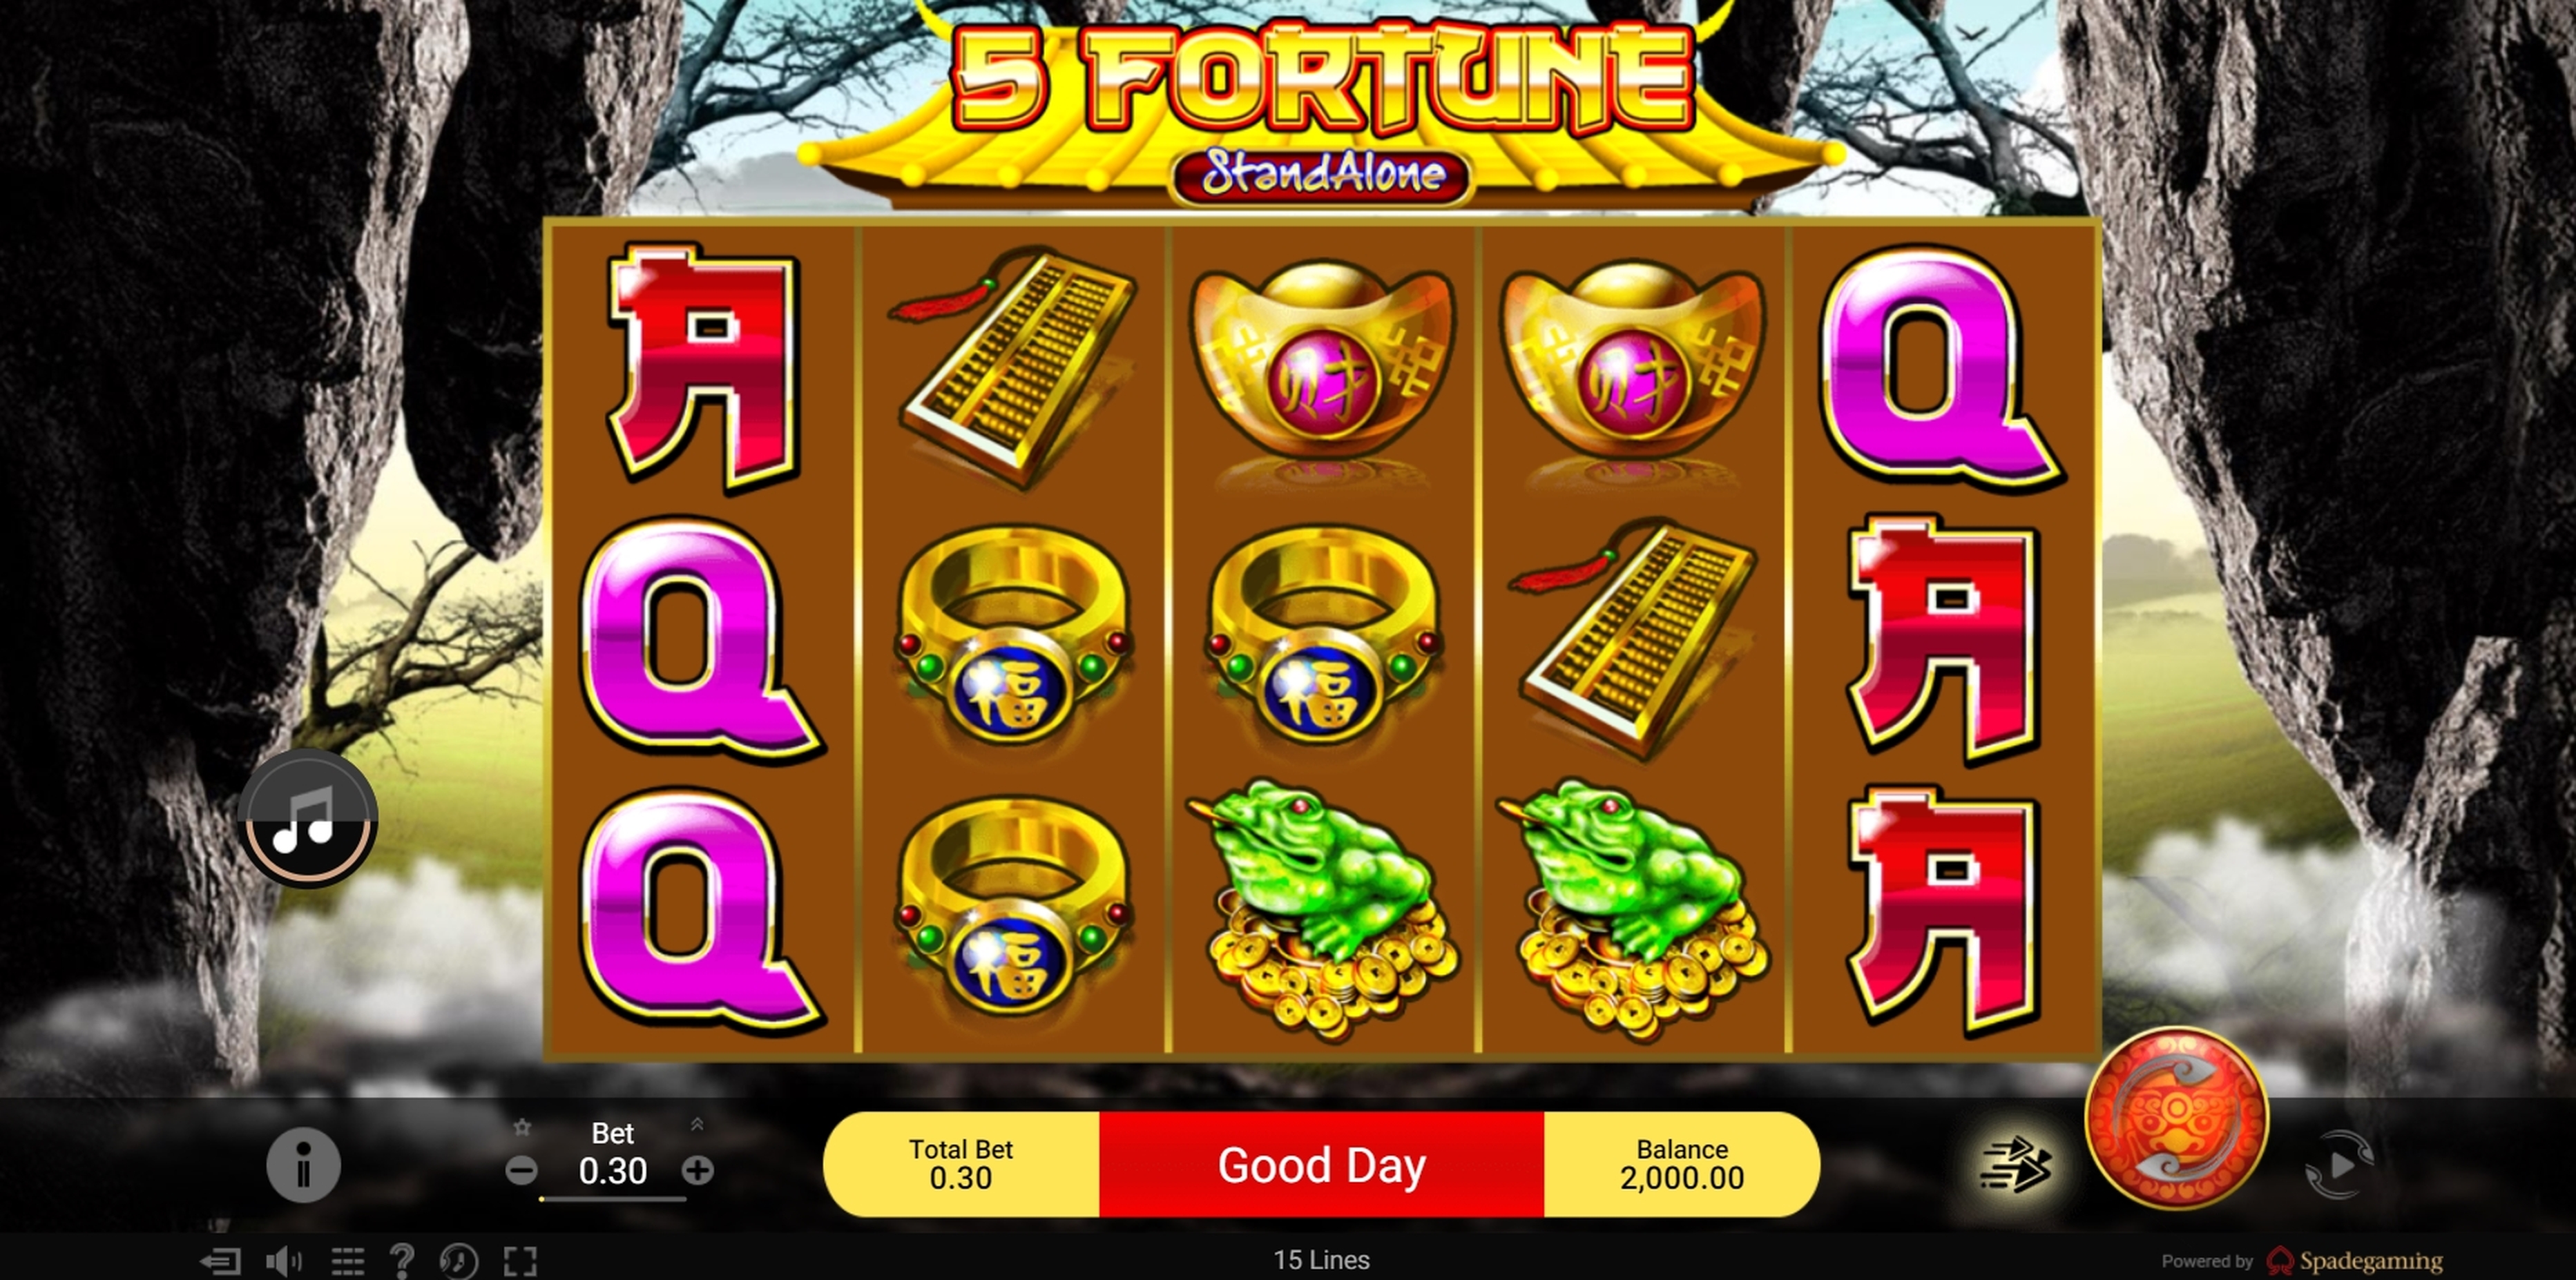 Reels in 5 Fortune SA Slot Game by Spade Gaming